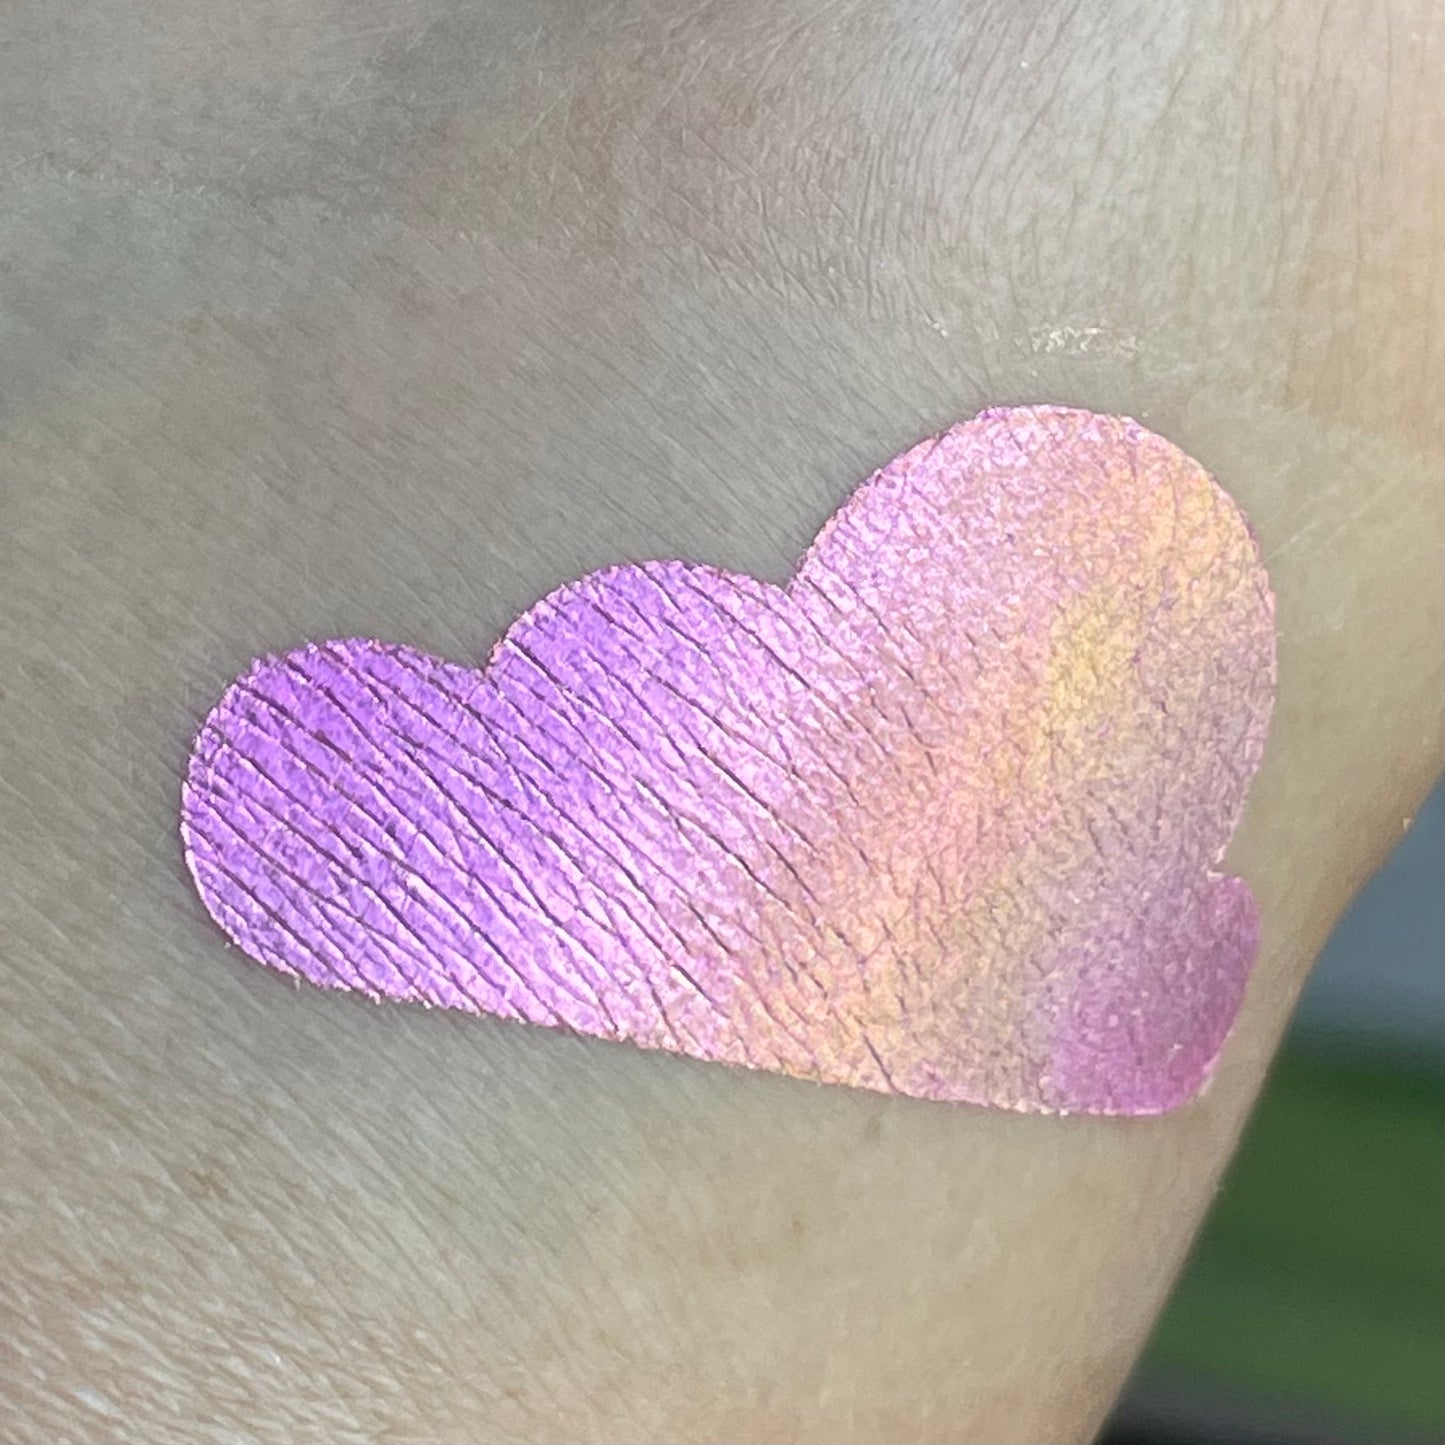 Pinking of You - Multichrome Eyeshadow